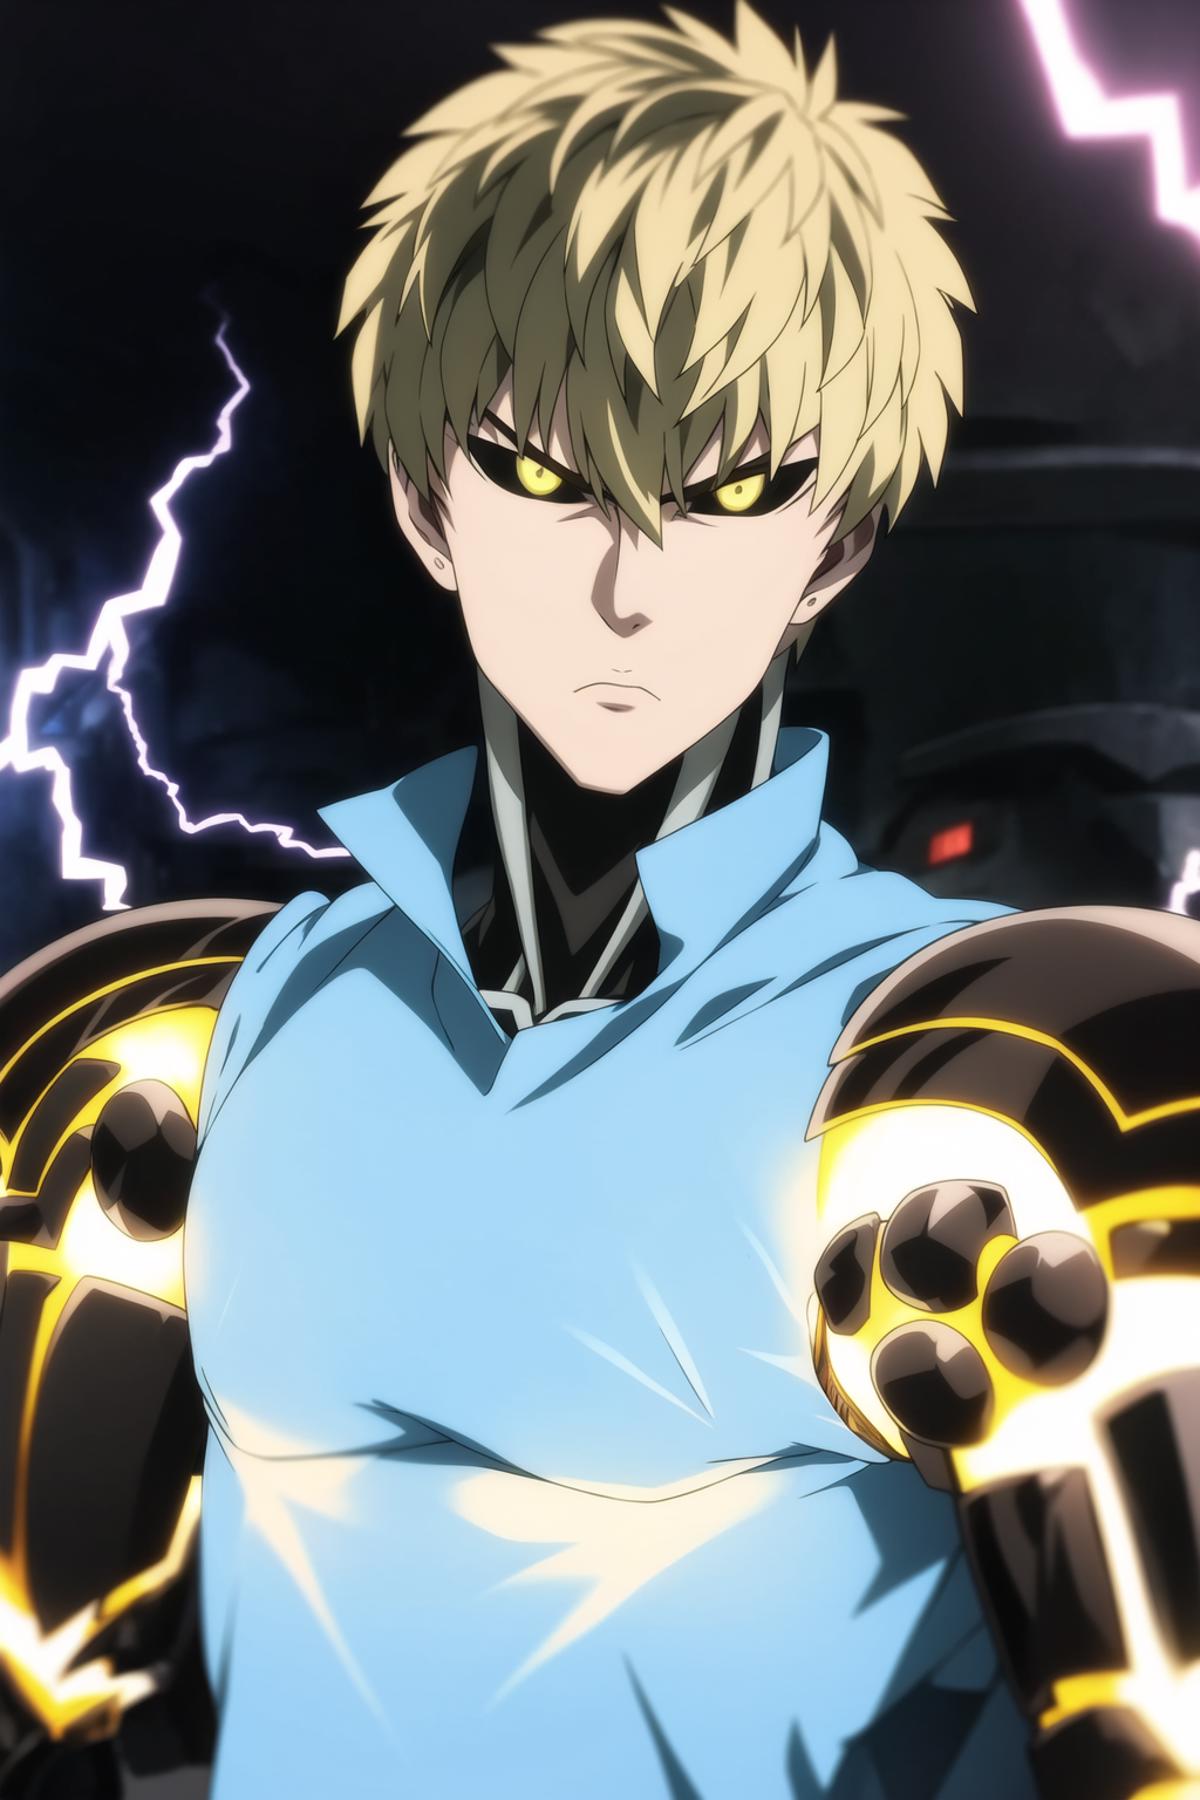 Genos (One Punch Man) image by Maximax67